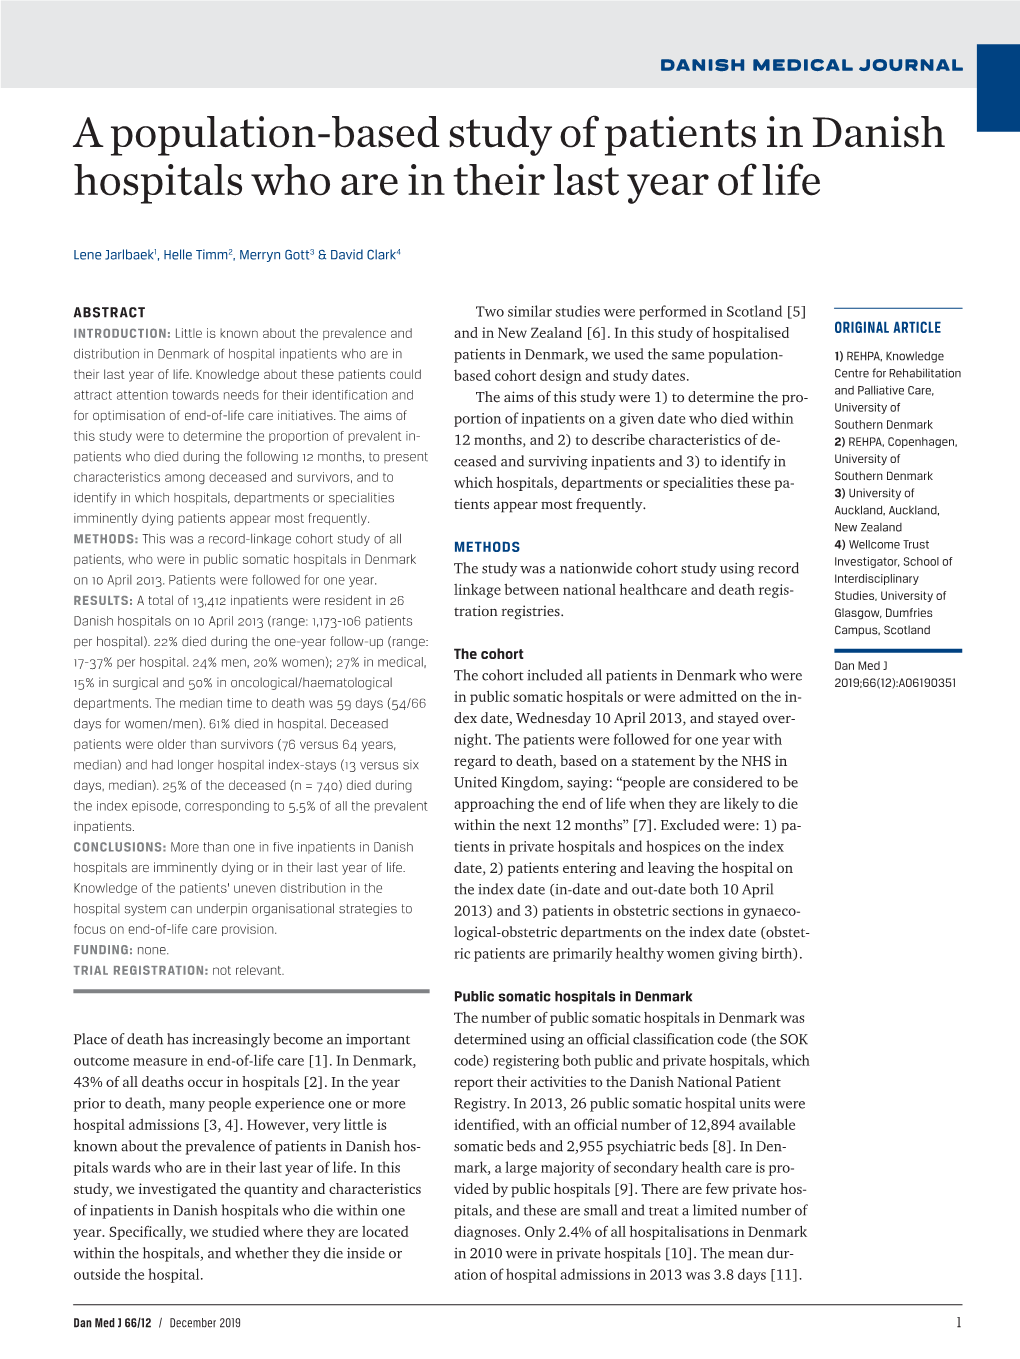 A Population-Based Study of Patients in Danish Hospitals Who Are in Their Last Year of Life